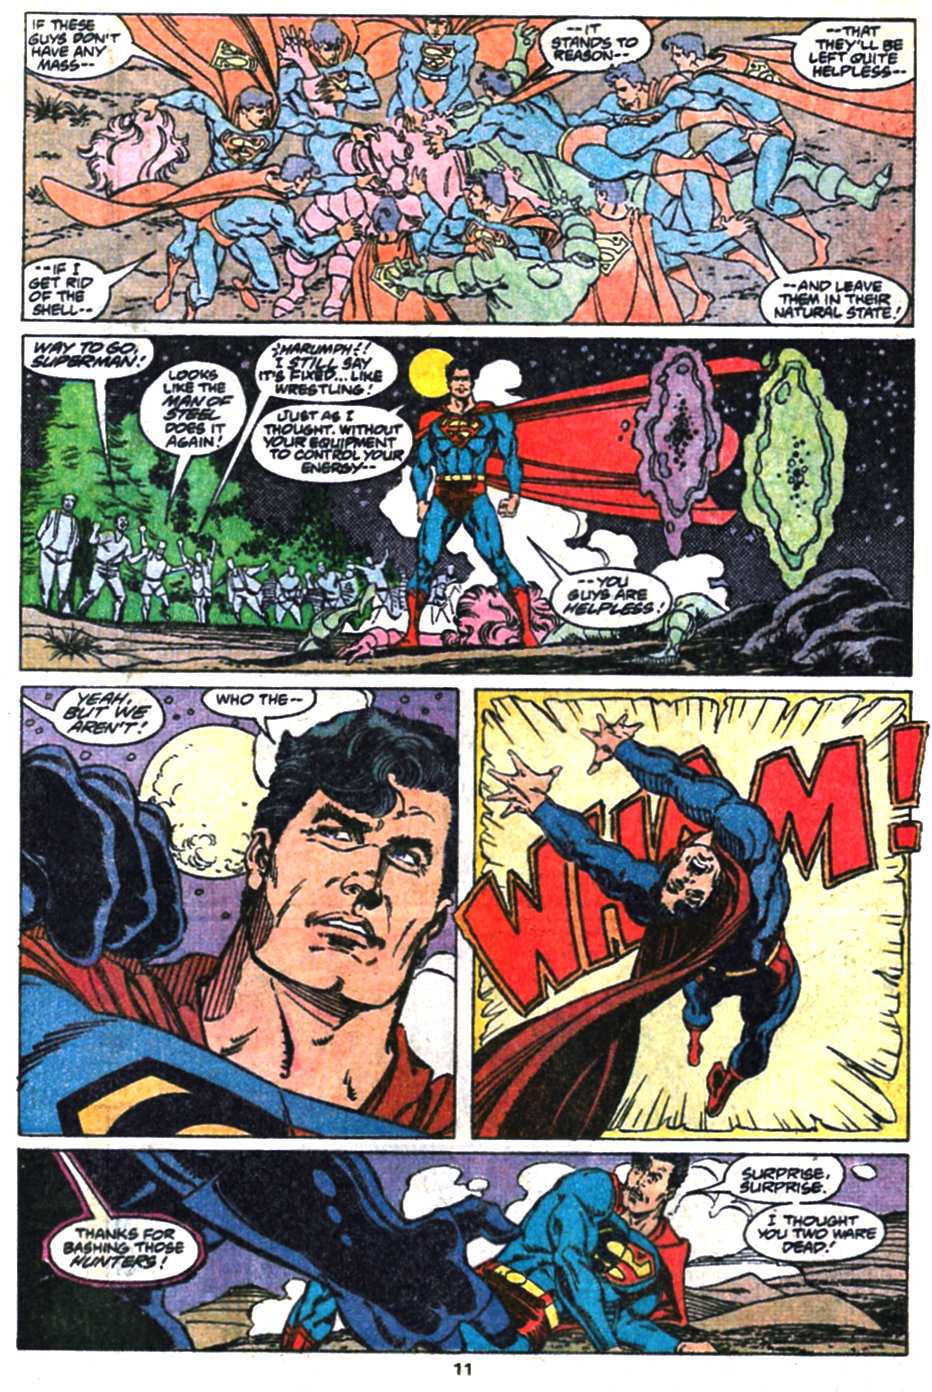 Adventures of Superman (1987) 469 Page 11